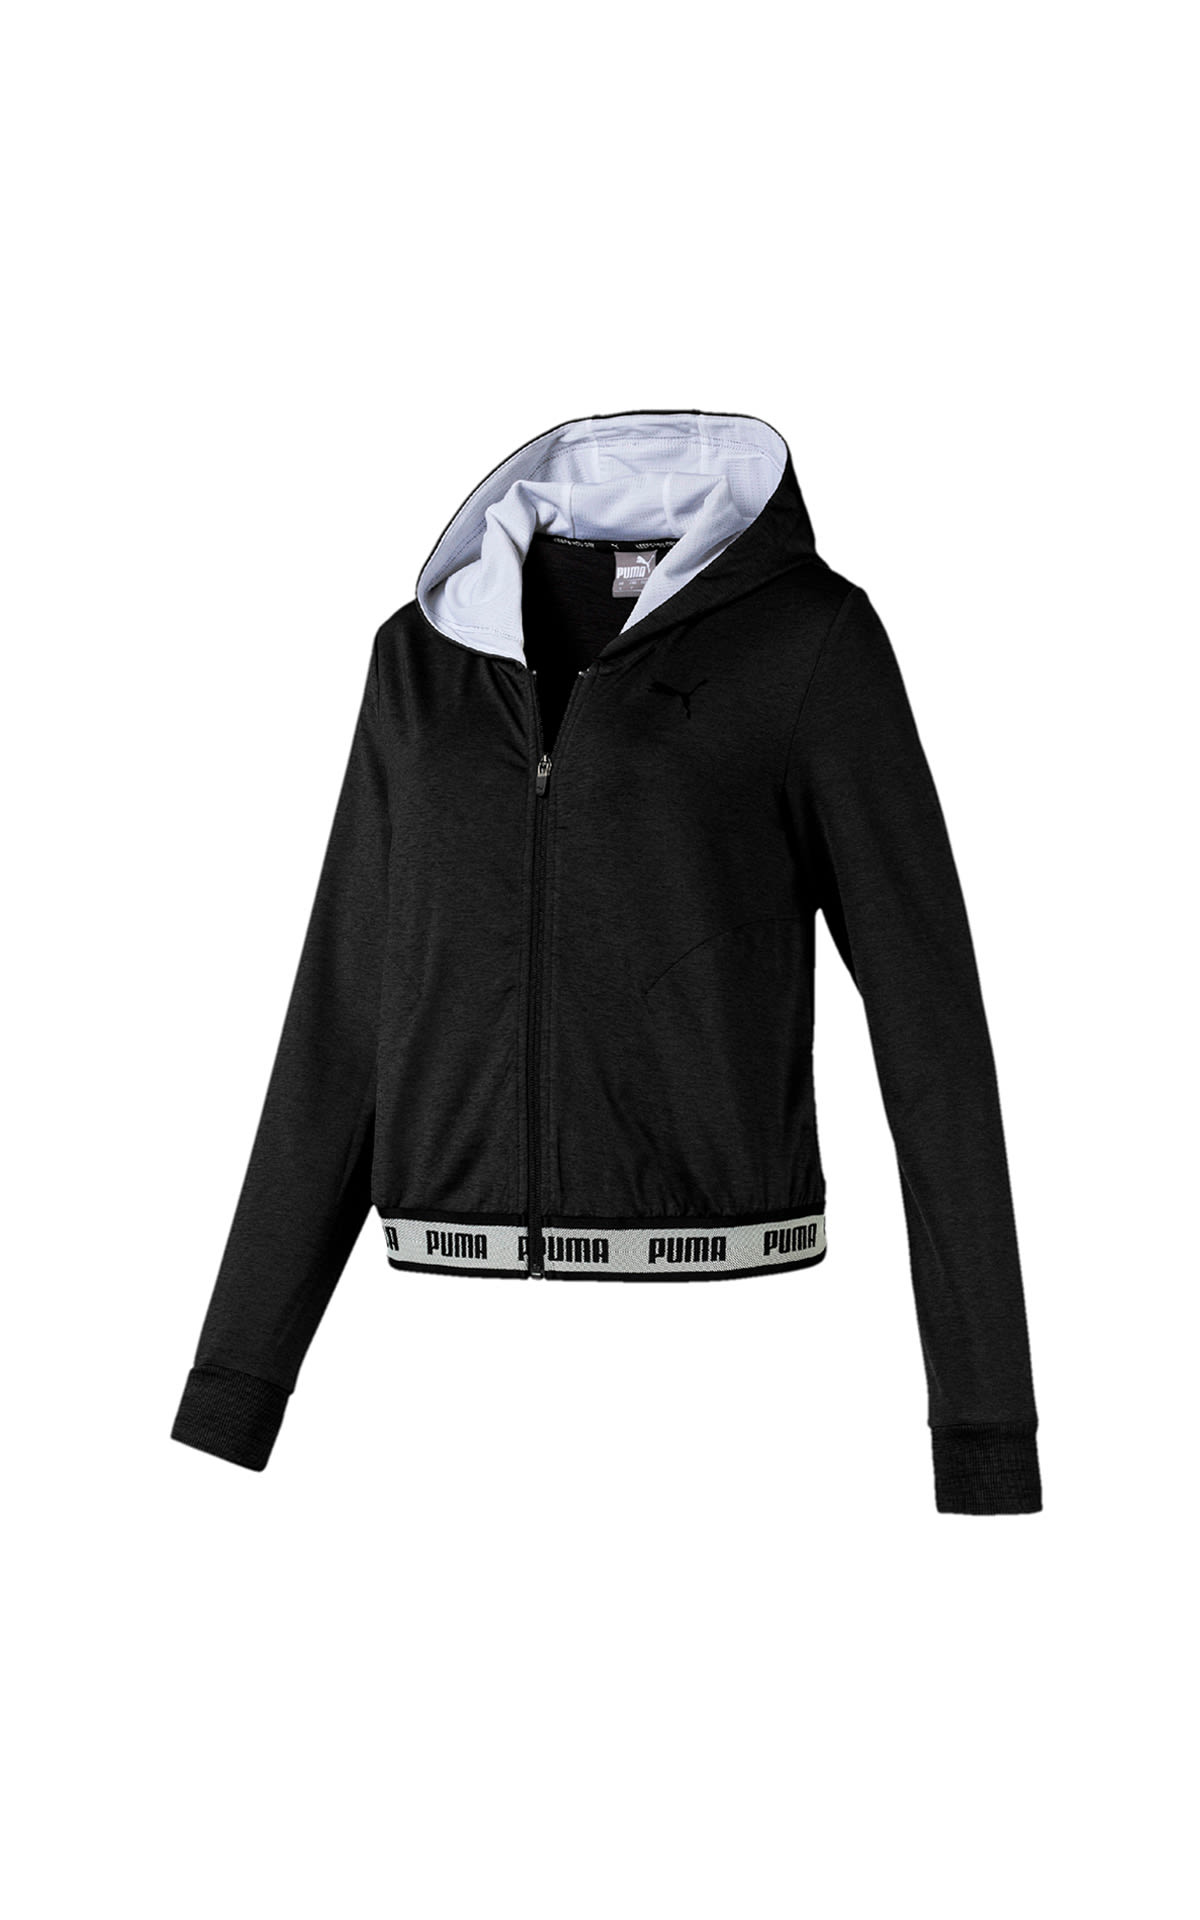 PUMA soft sports drapey zip hoody at The Bicester Village Shopping Collection